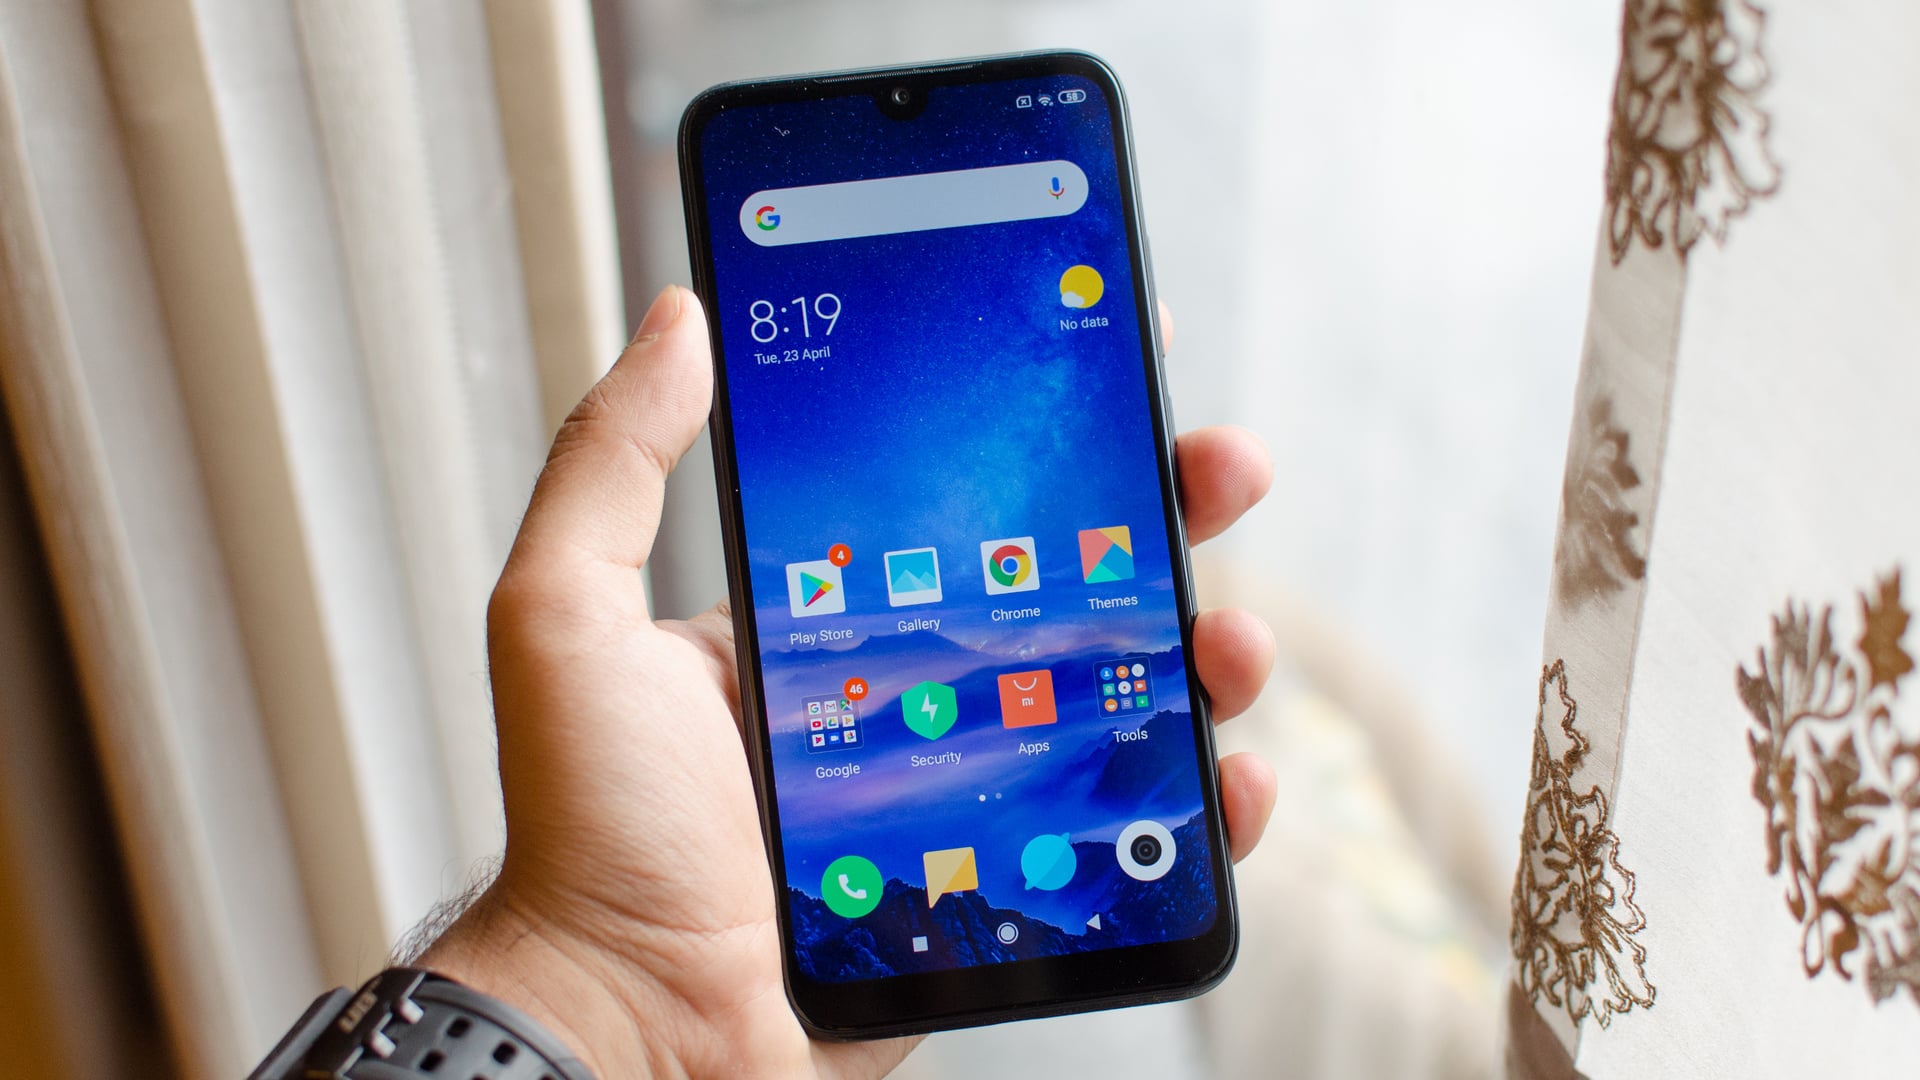 Redmi 7 in hand with homescreen